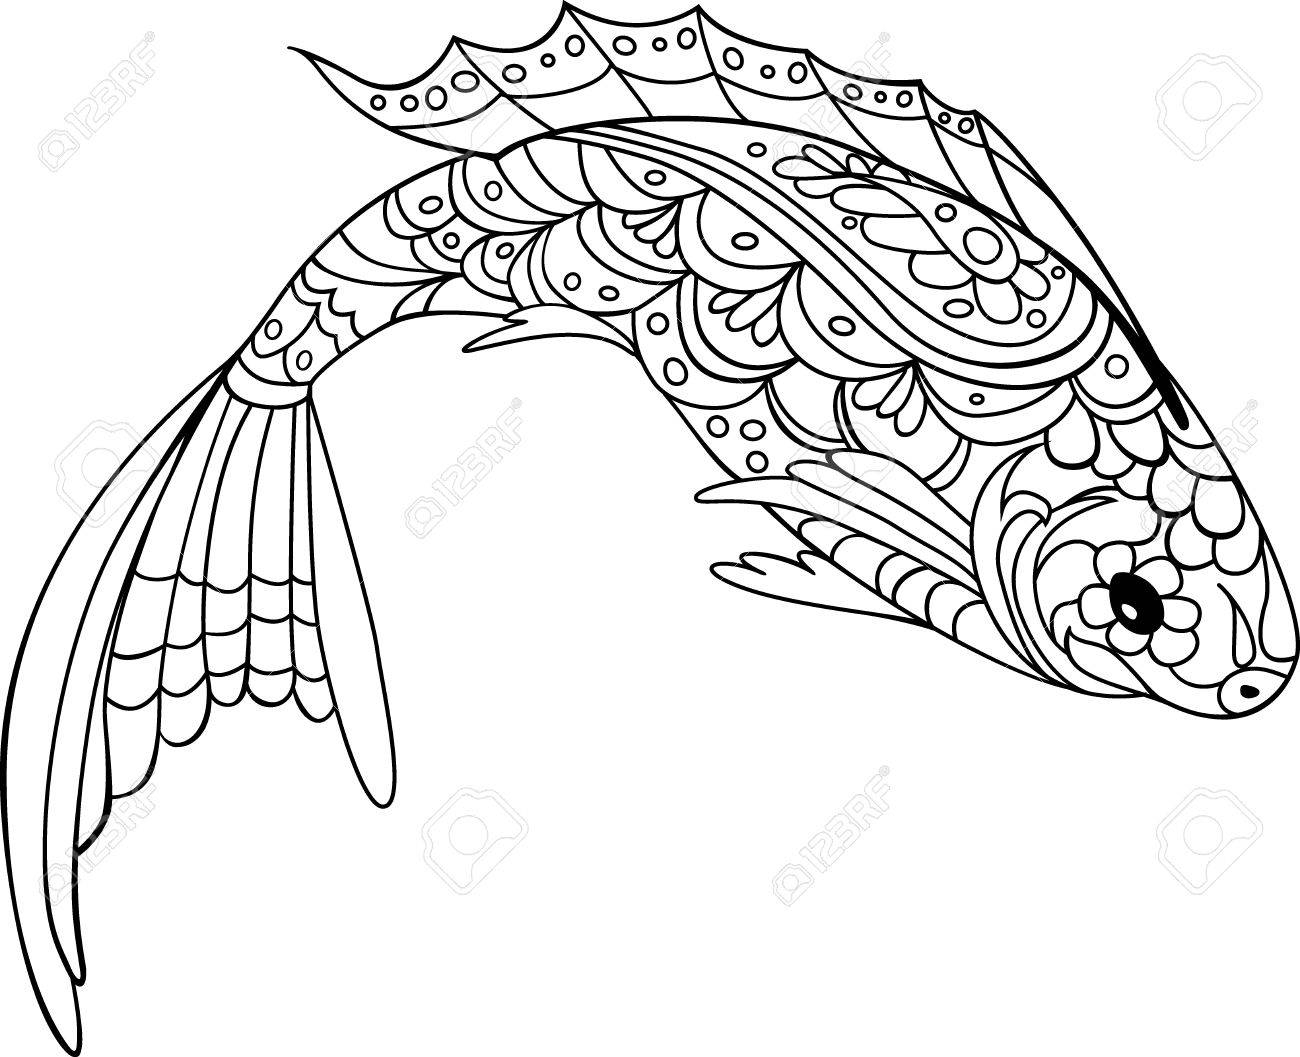 Coloring Pages Fishing Coloring Print Download Cute And Educative Fish Coloring Pages